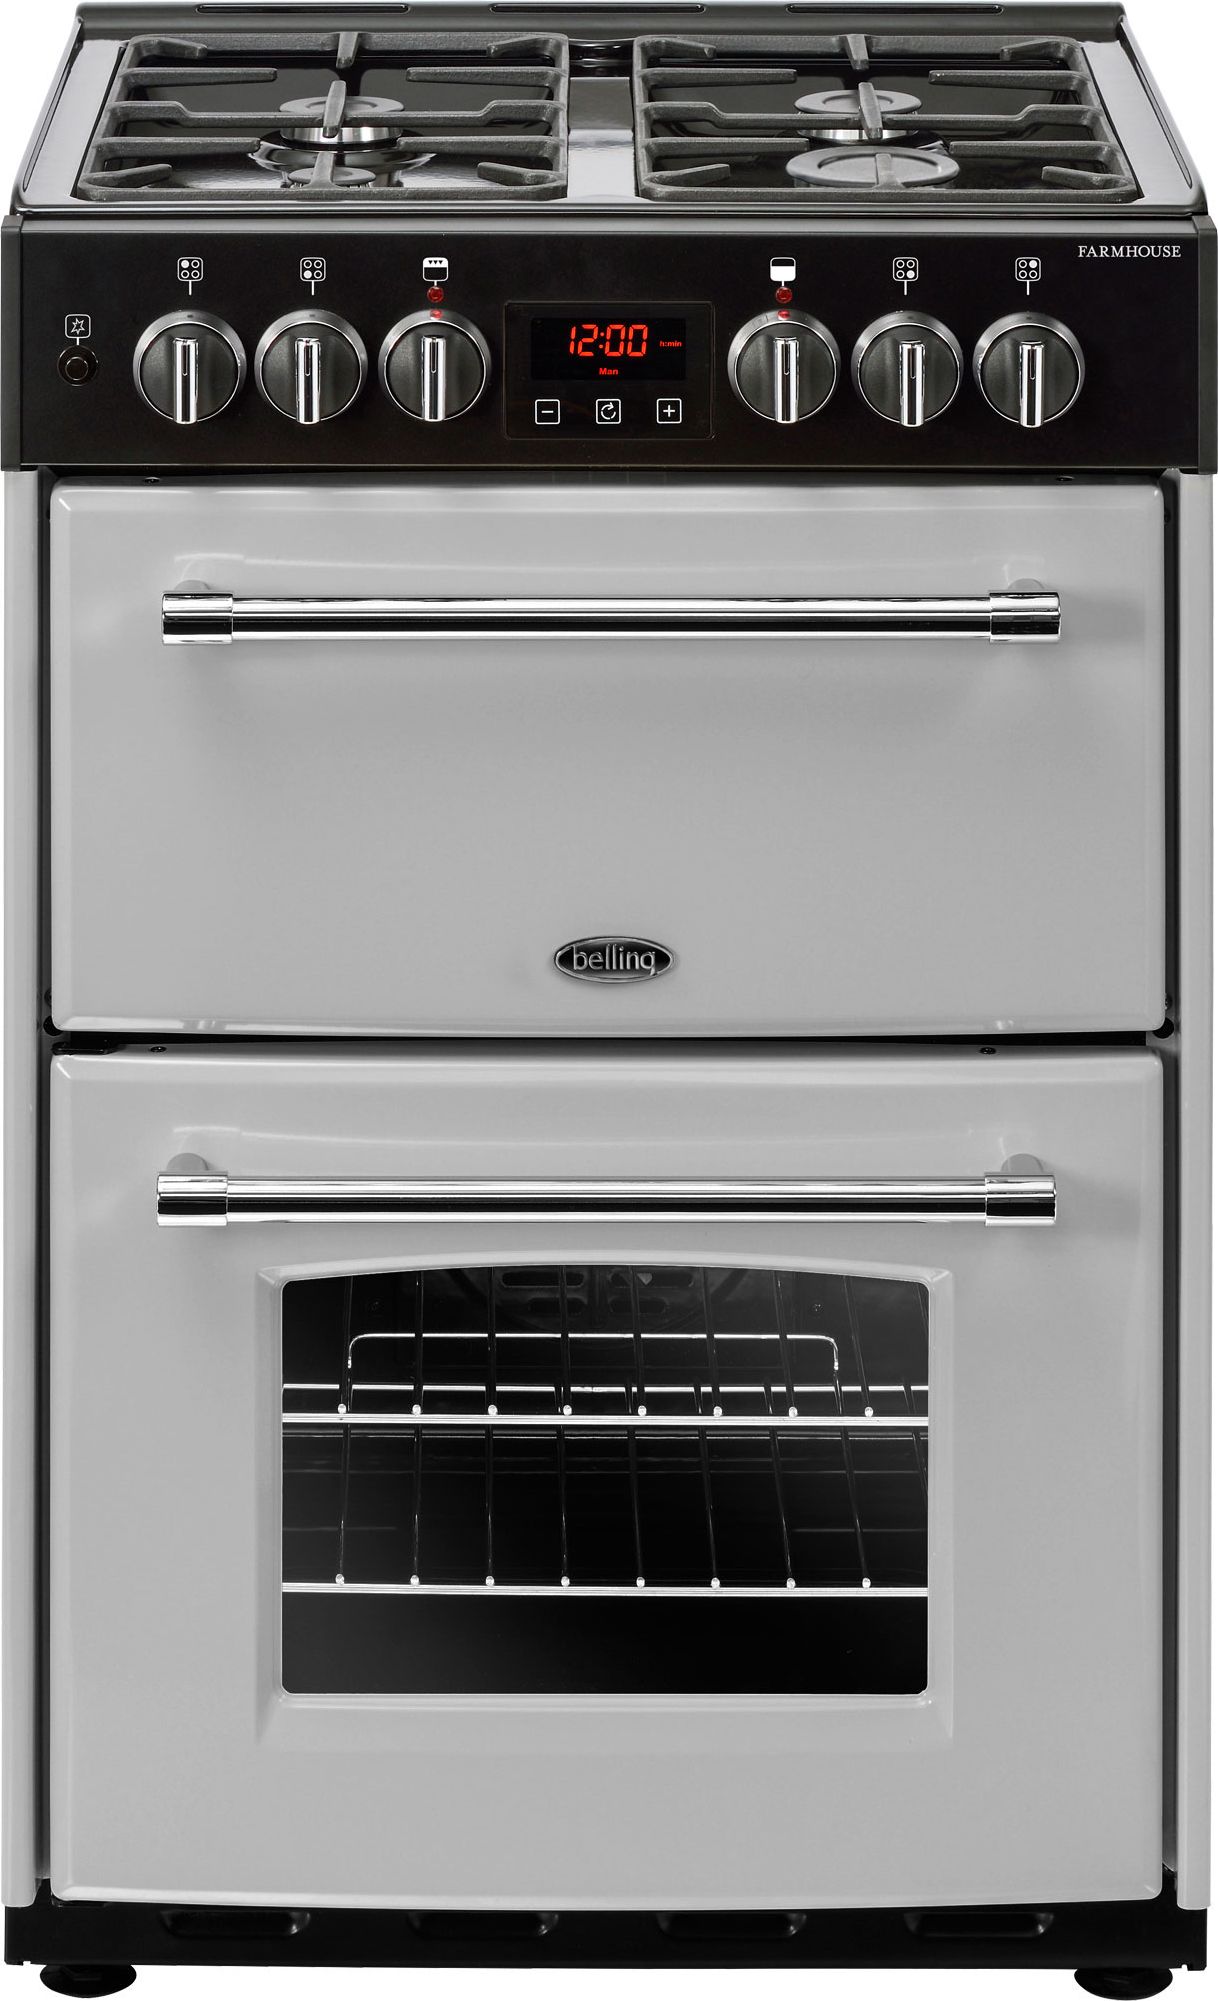 Belling Farmhouse60DF 60cm Freestanding Dual Fuel Cooker - Silver - A/A Rated, Silver